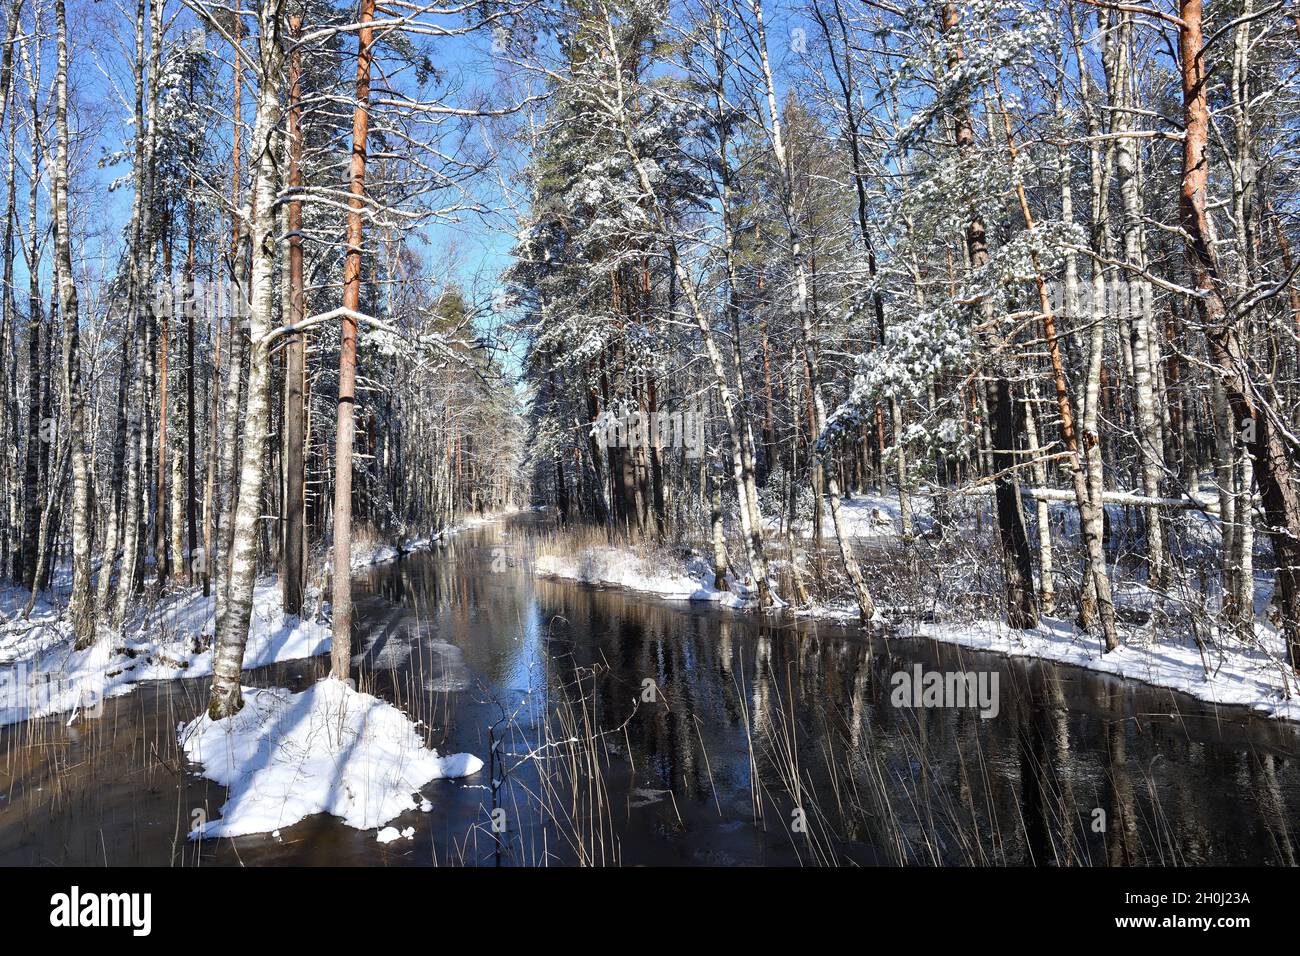 Forest river at early spring, snow covered landscape and trees Stock Photo